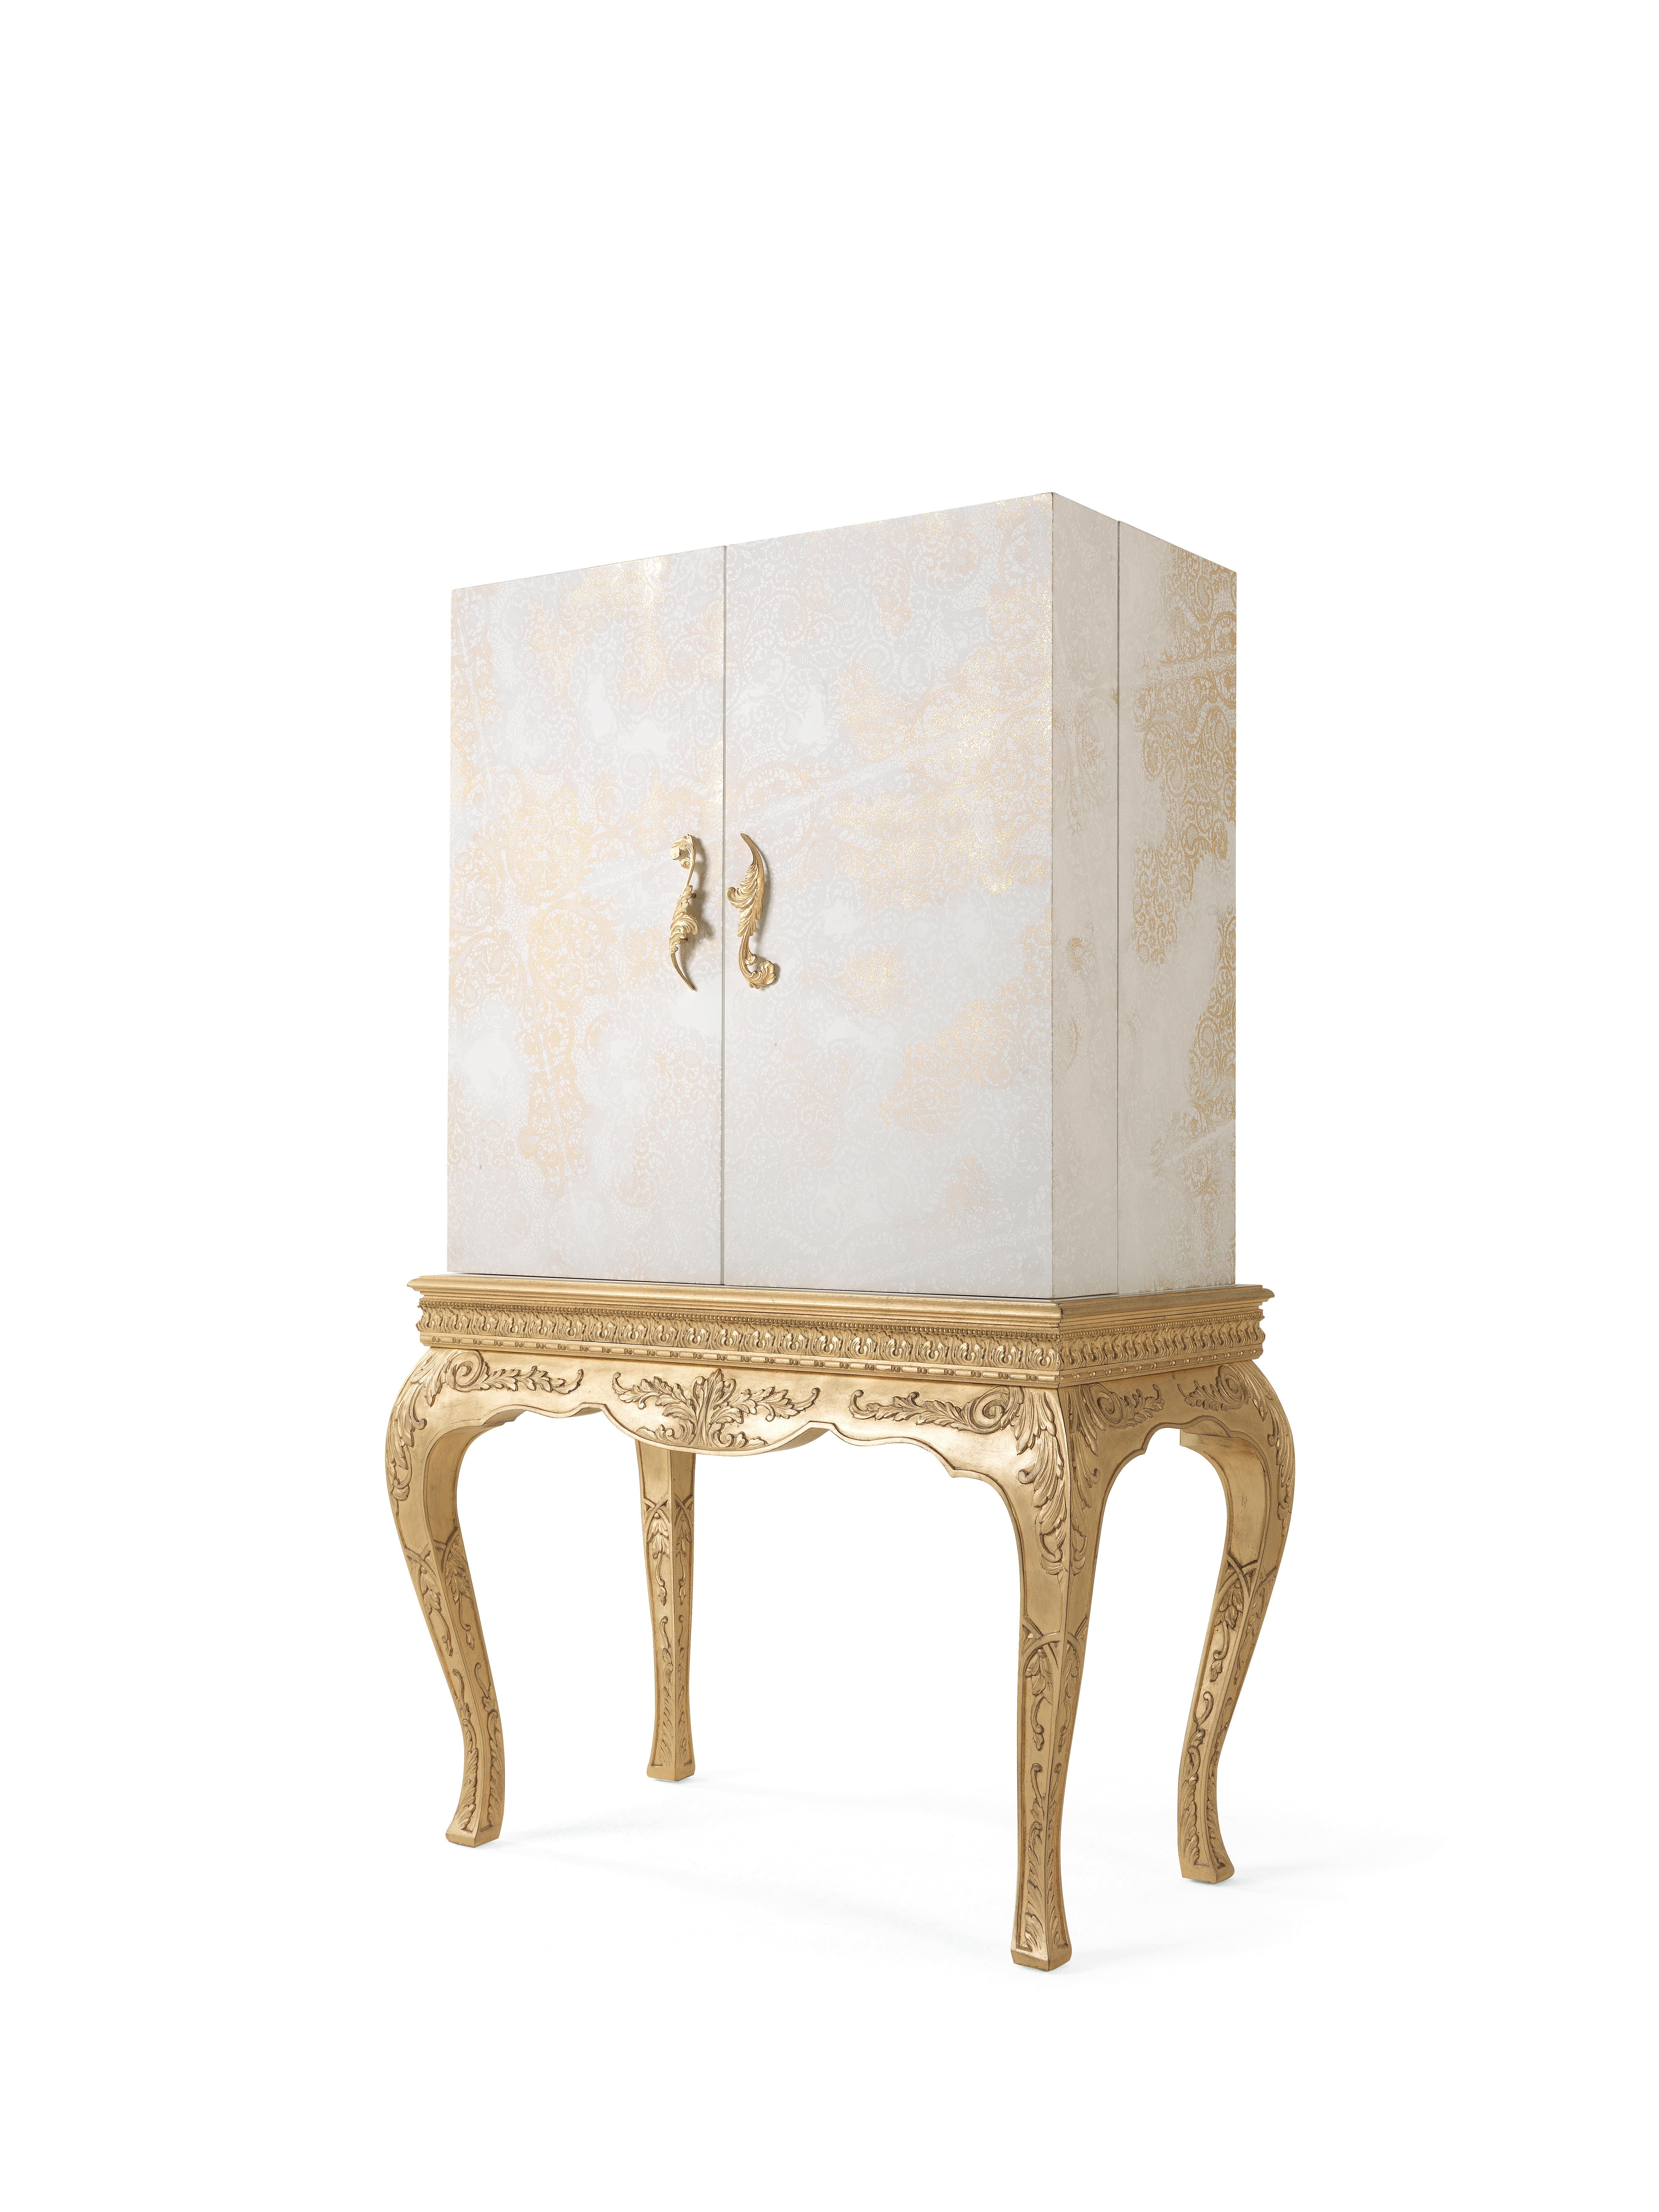 The jewel cabinet of the Brocart line presents a base with hand-carved legs and antique gold leaf finishing in pure classic style, combined with an upper part featuring a more essential and linear volume. The ornamental theme evokes the Cantù lace,